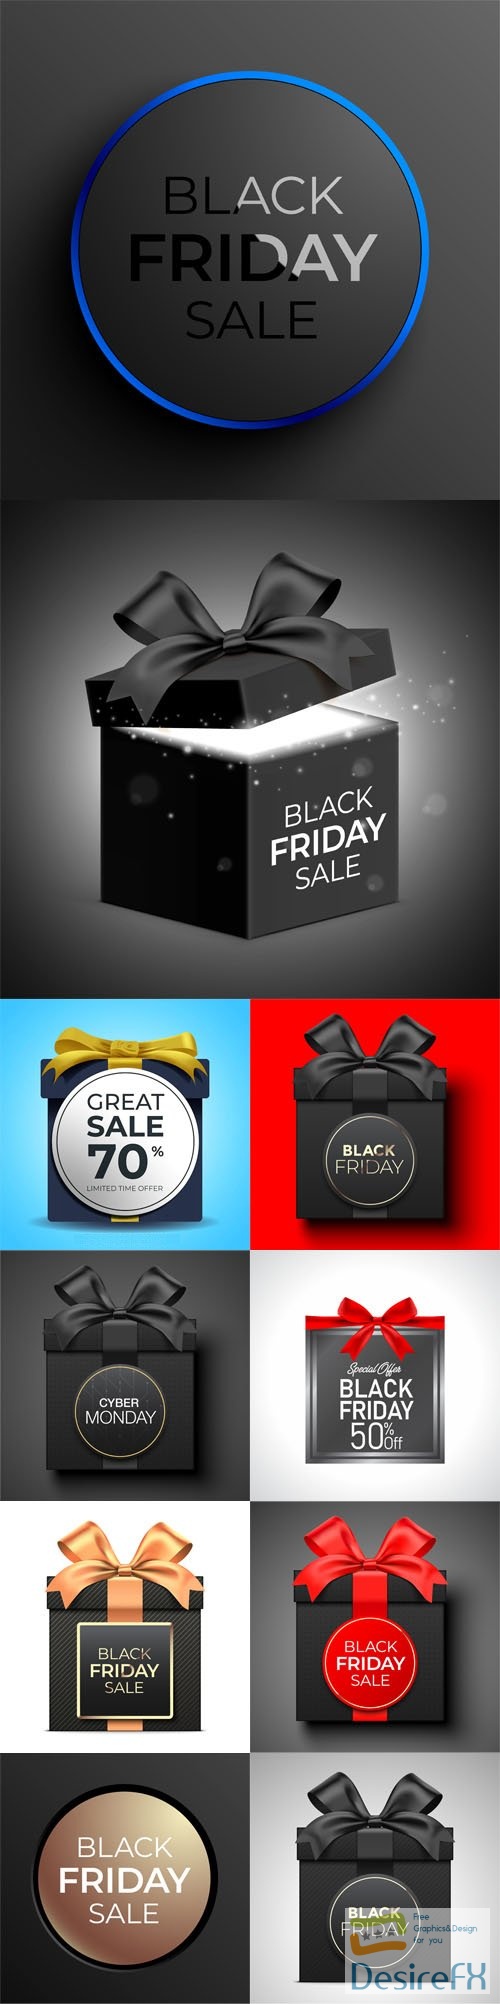 Black Friday - 10+ Realistic Gift Boxes Vector Templates